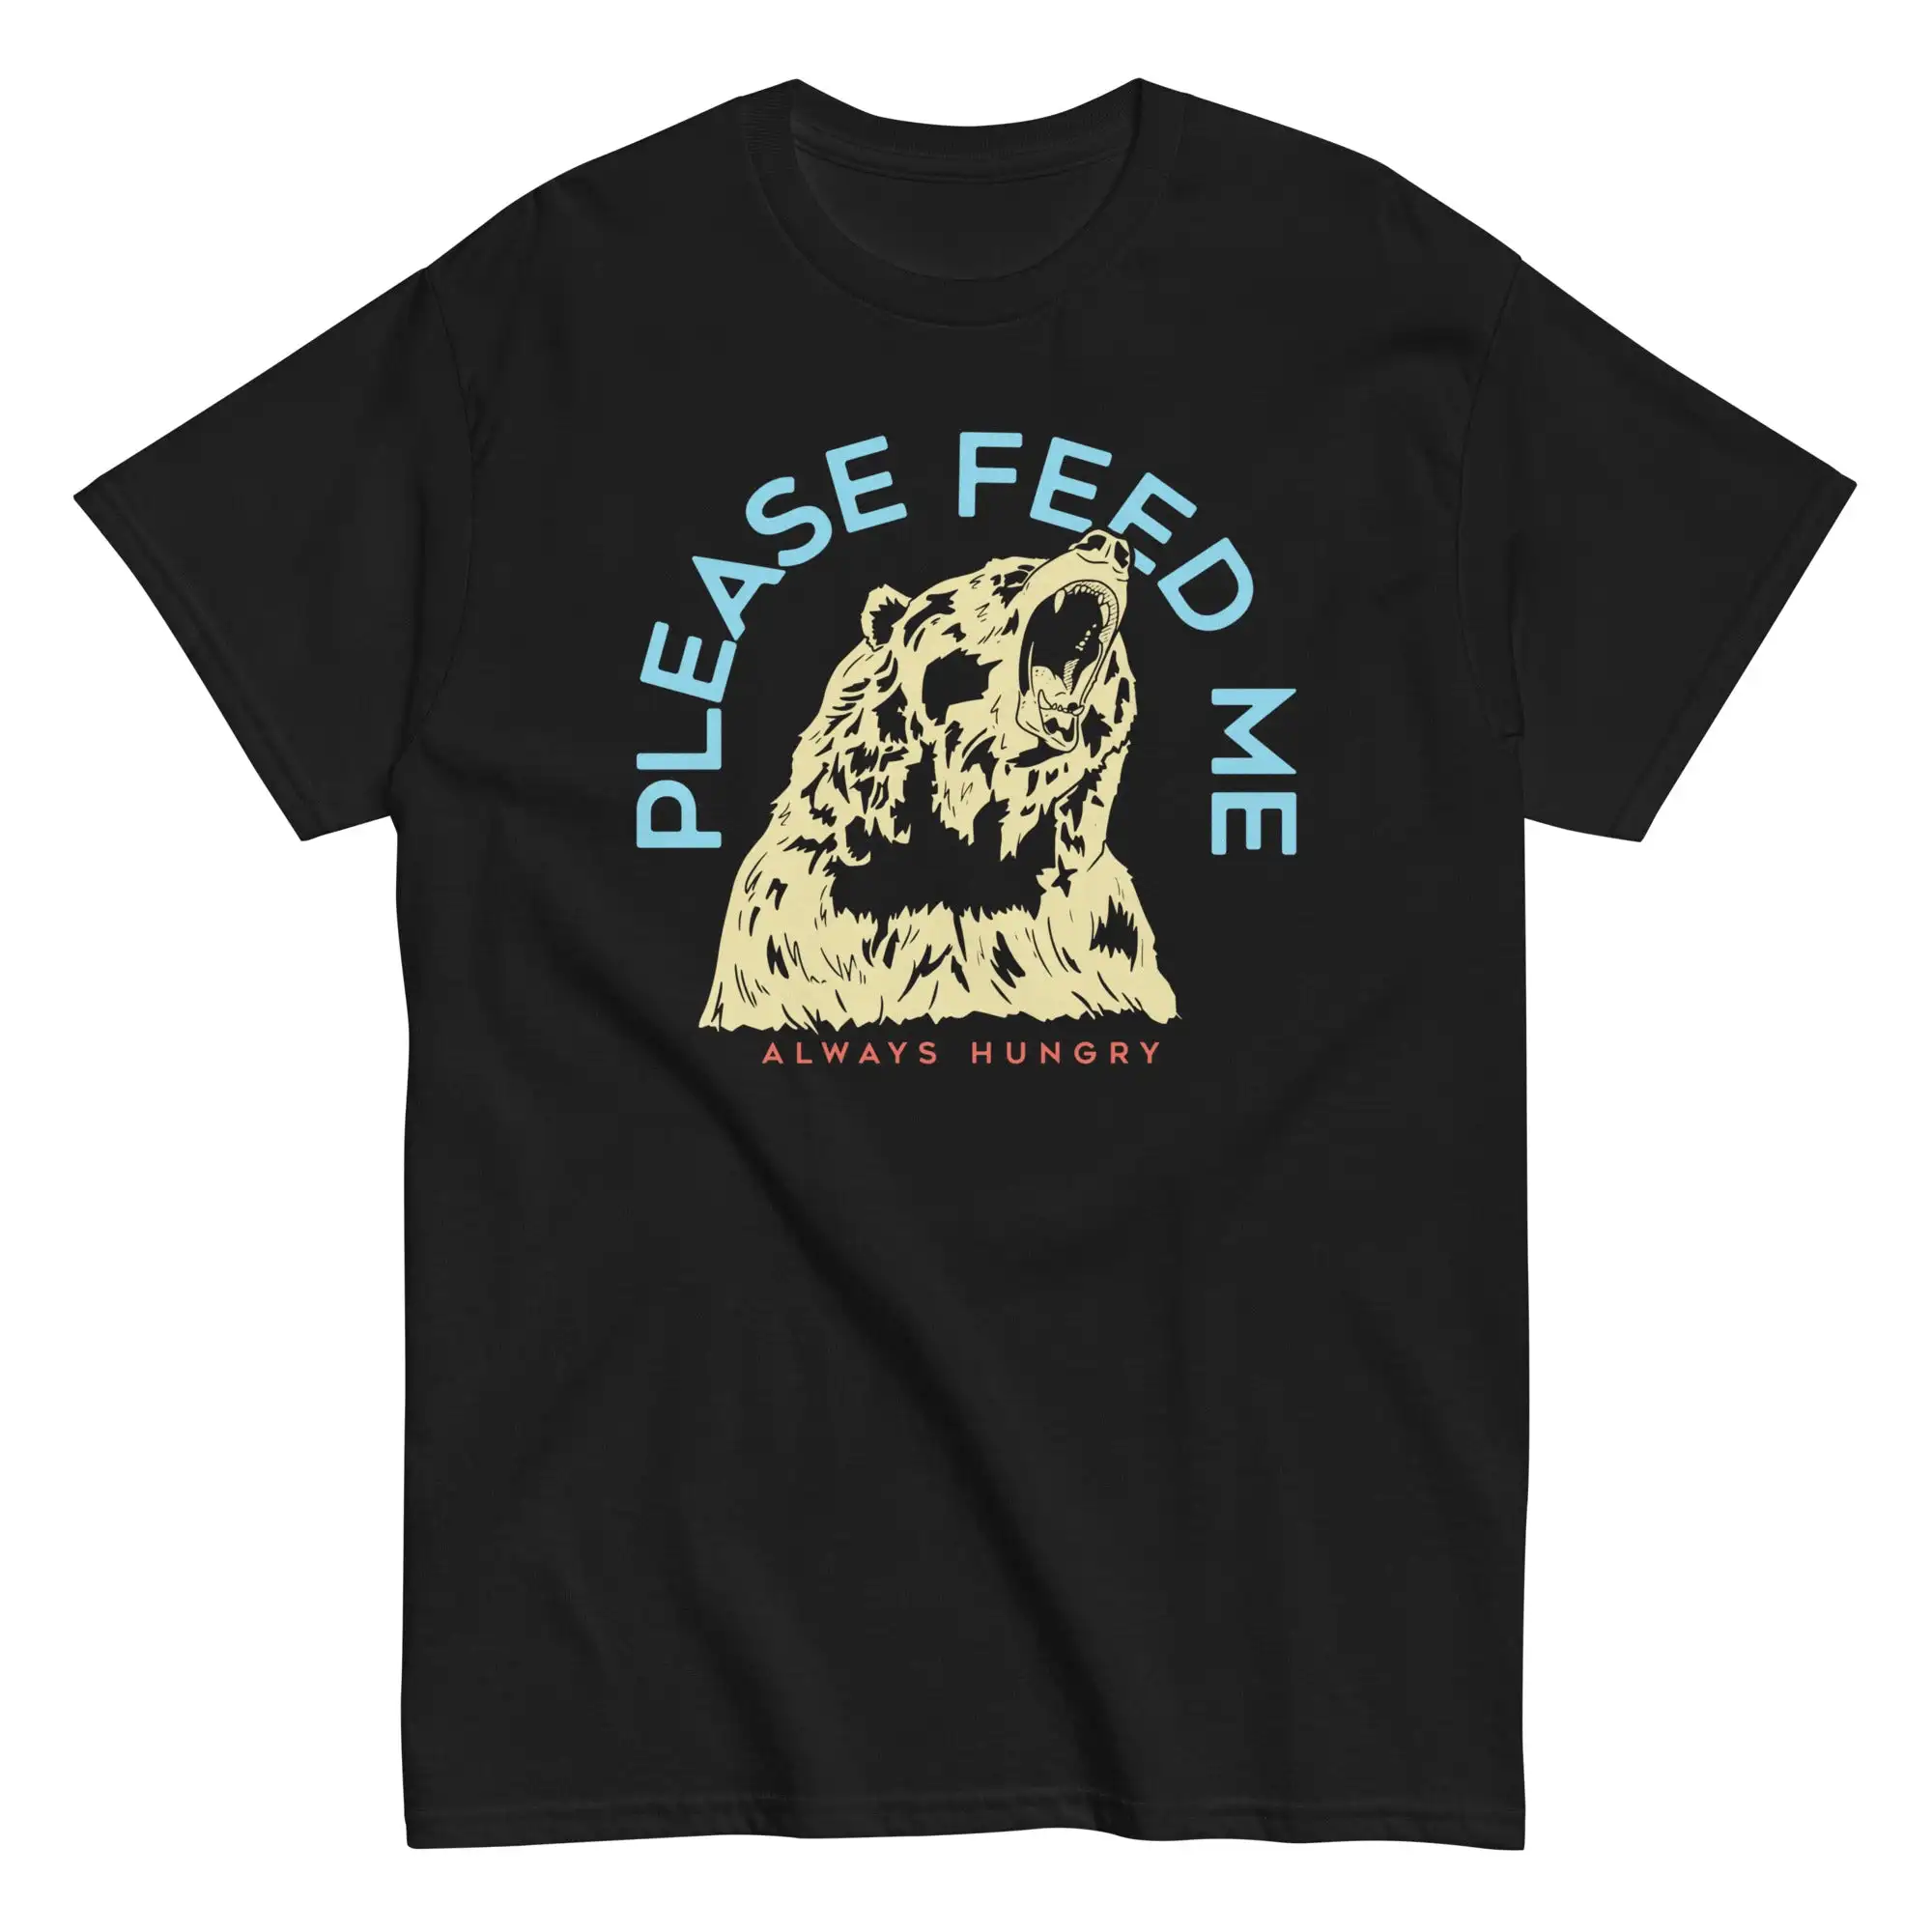 

Please Feed Me, Always Hungry Unisex T-shirts for Man Woman Short Summer Tees Casual Cotton New Arrival Fashion Couple's Cloths